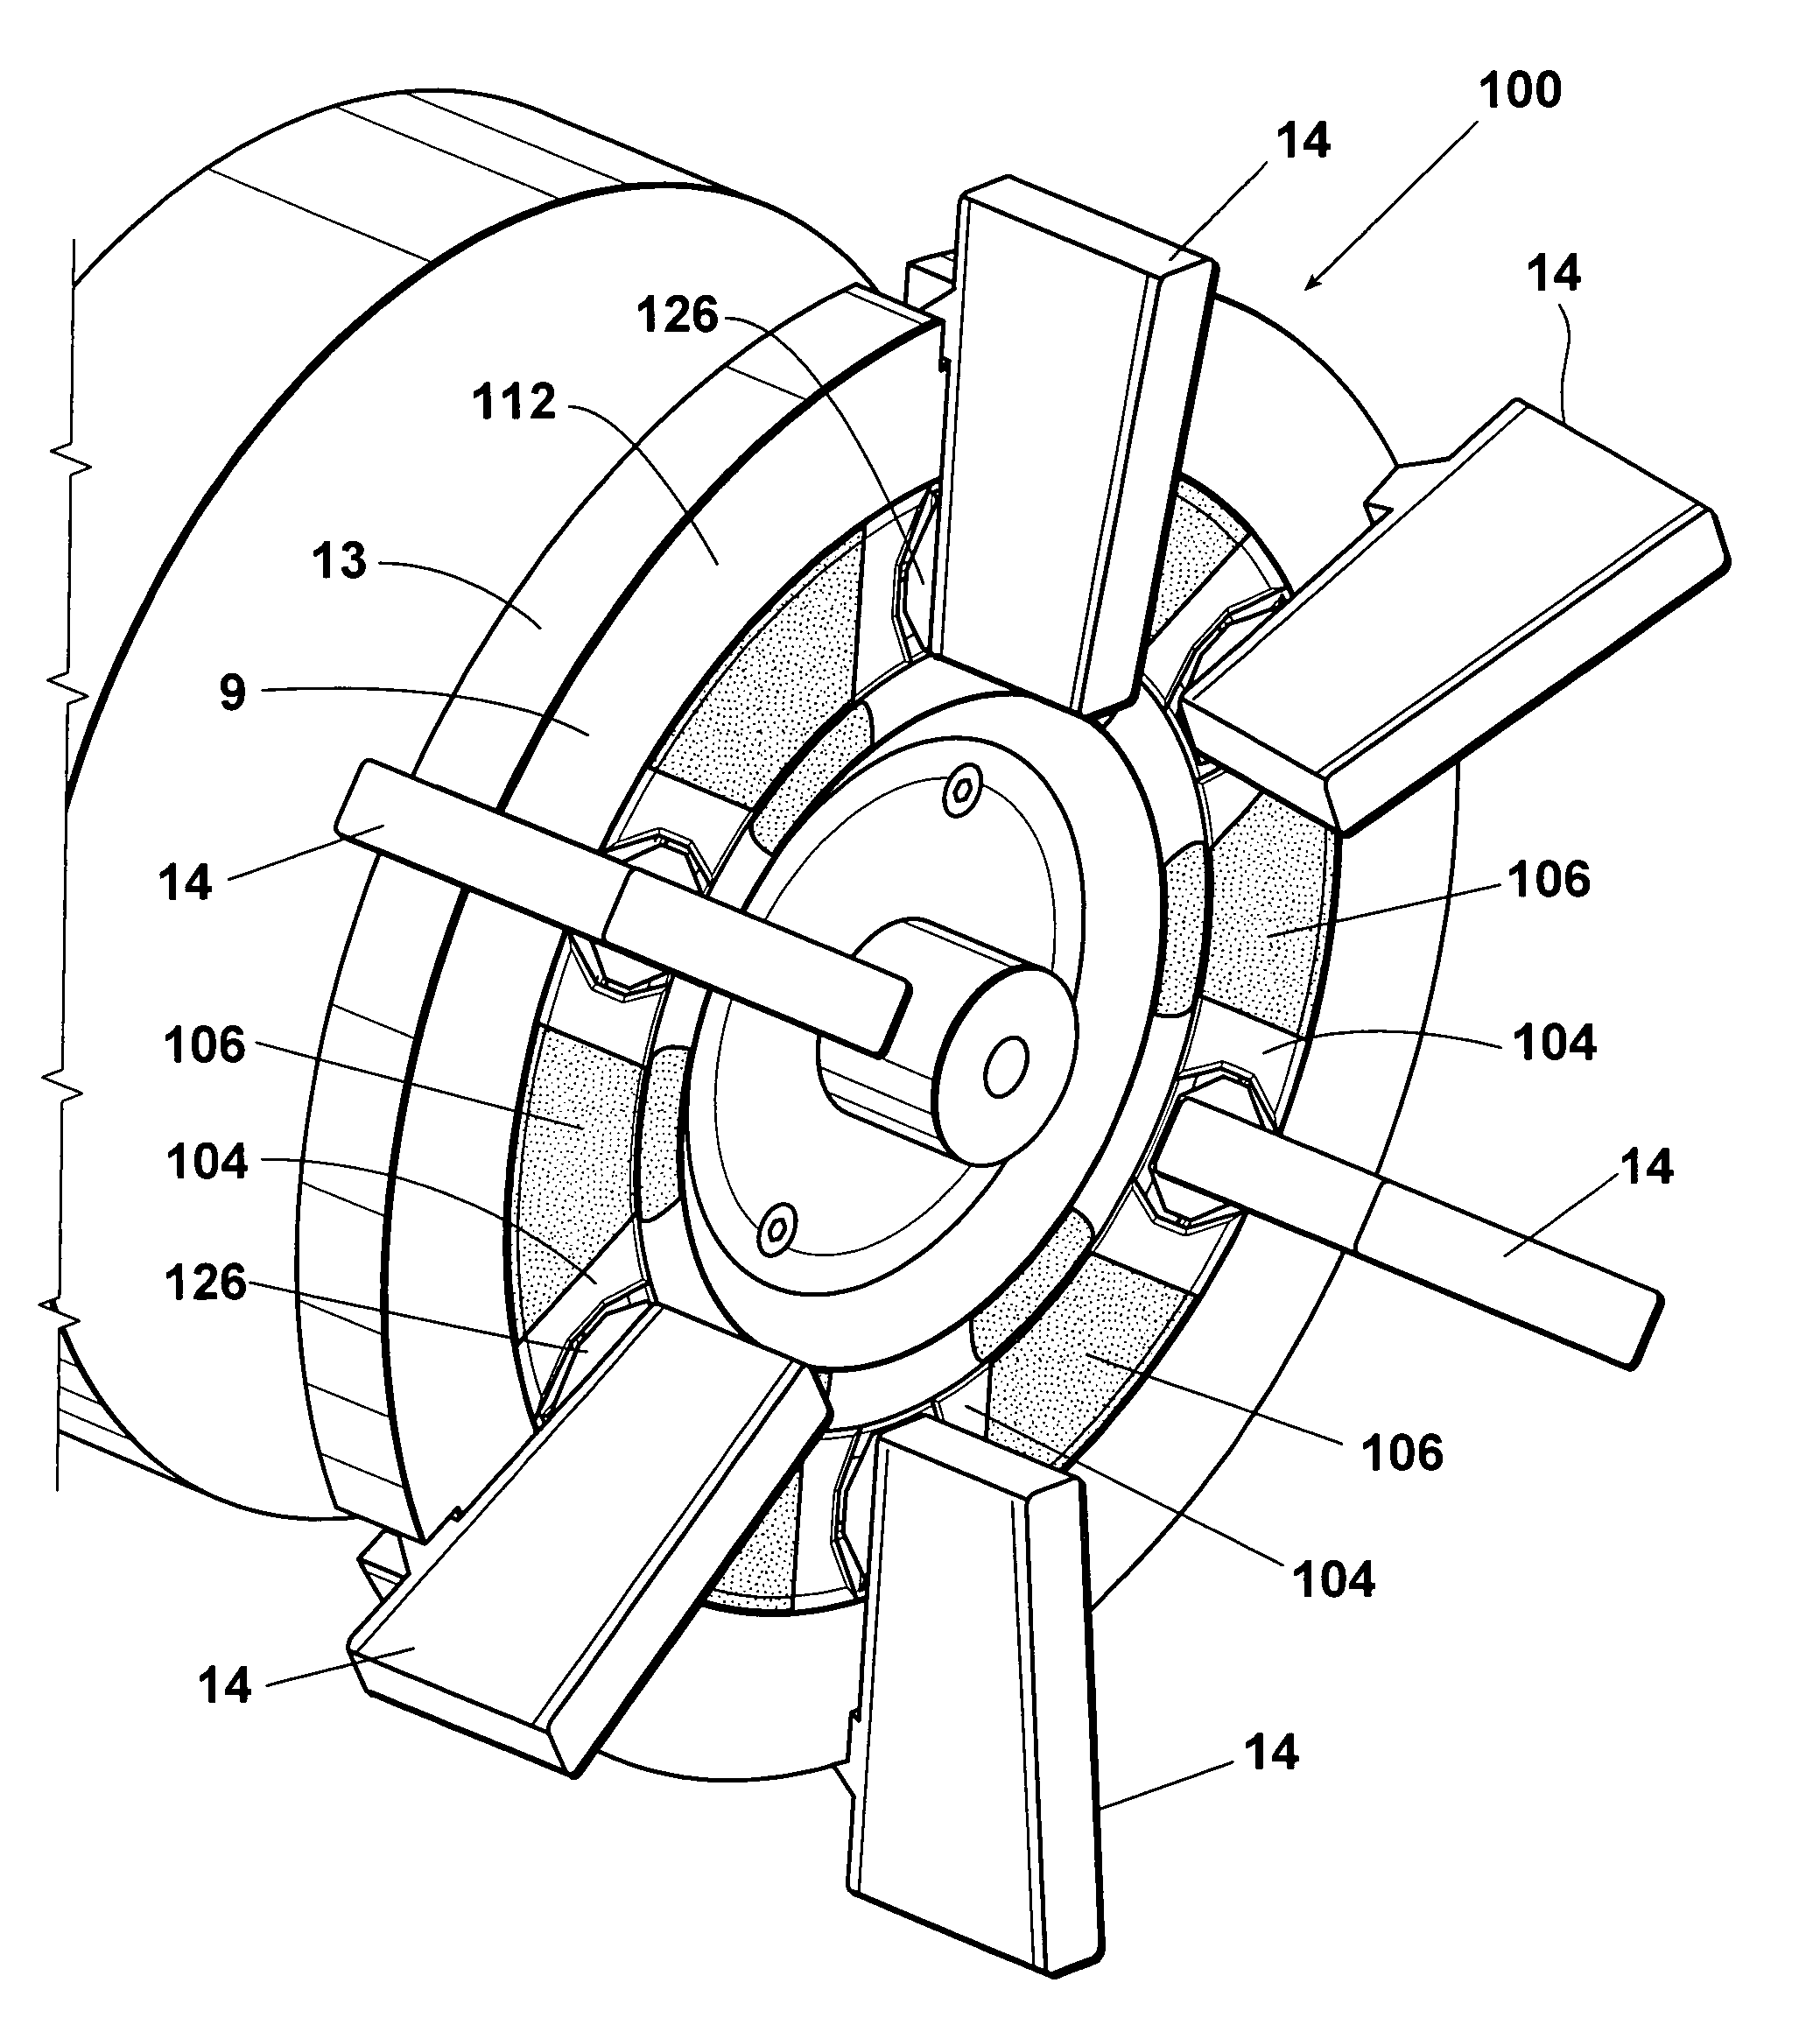 Throwing wheel assembly